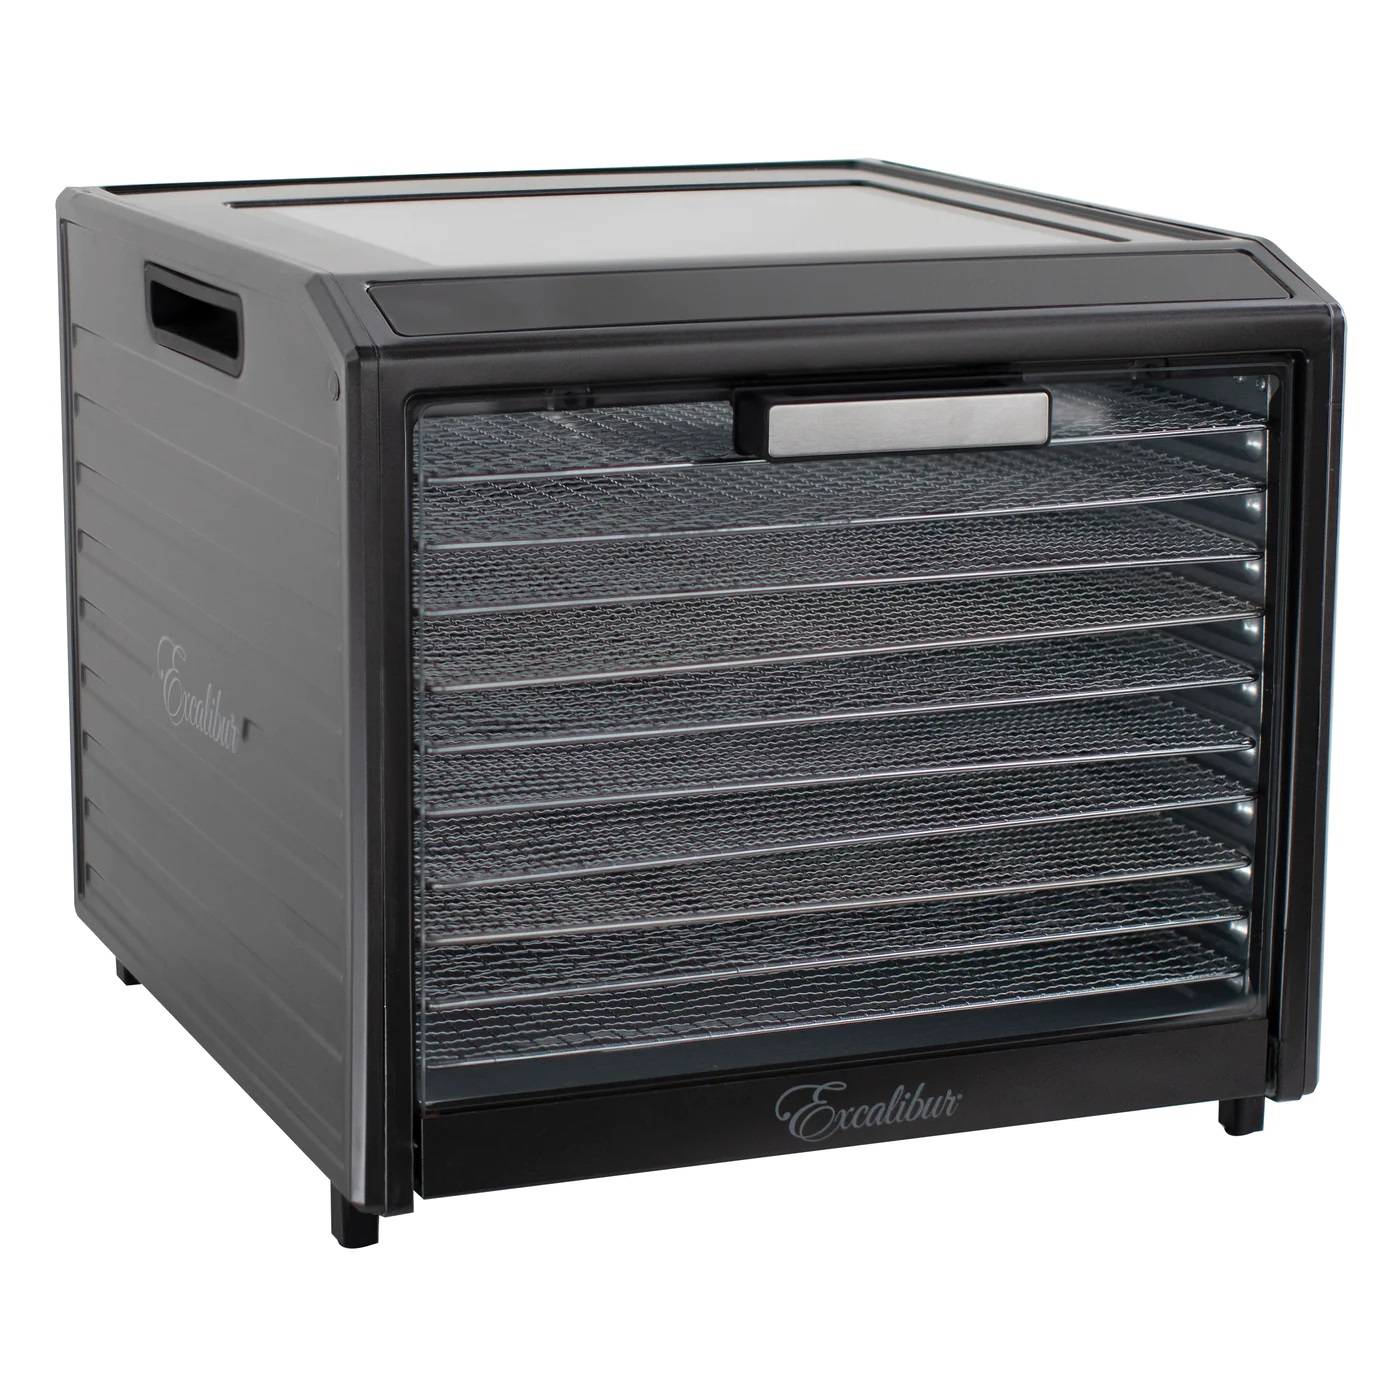 Excalibur DH10SS performance digital 10 tray stainless steel dehydrator with clear door closed.